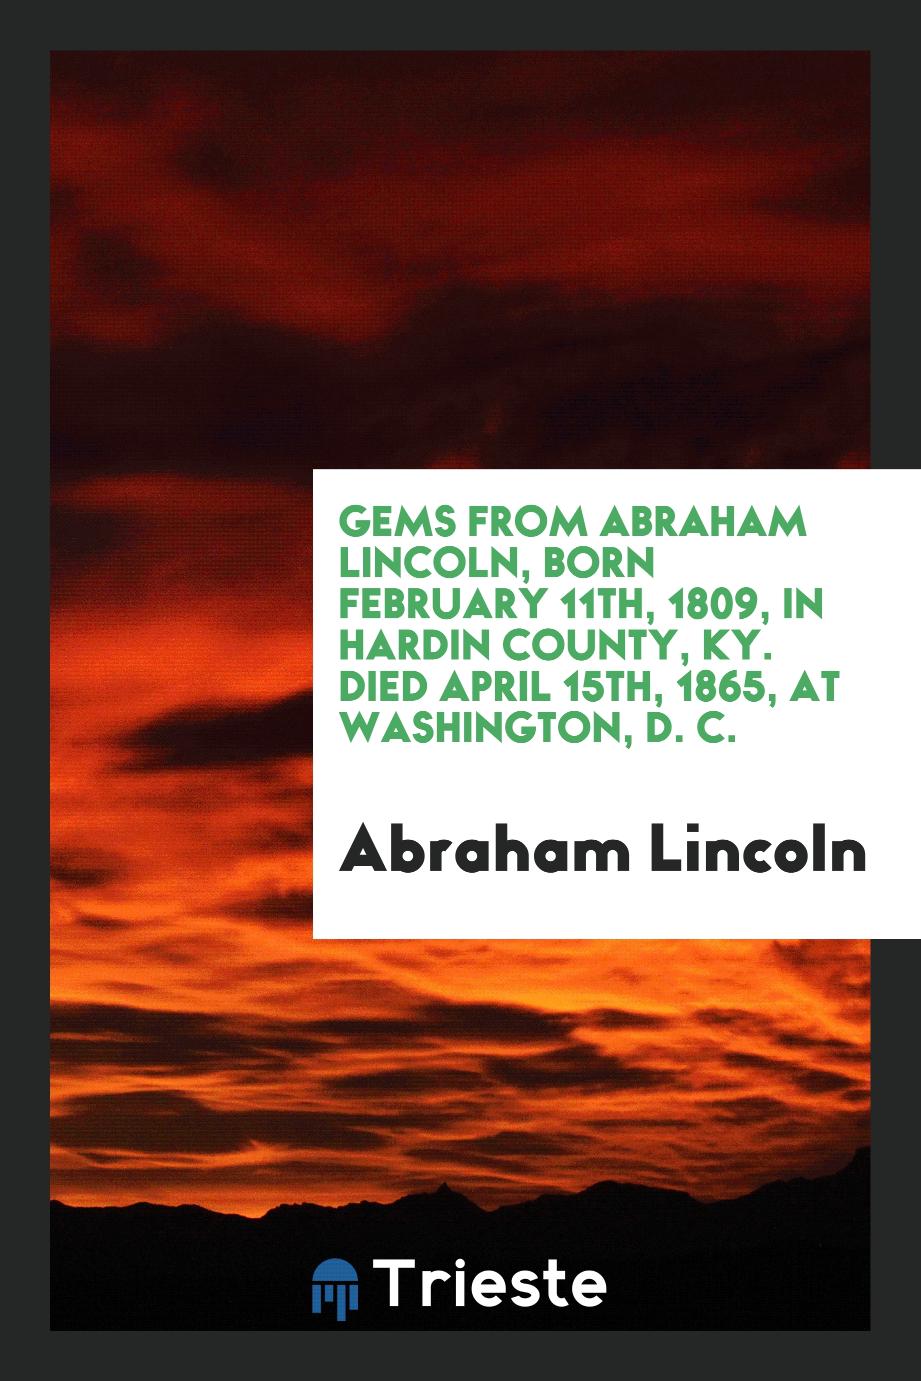 Gems from Abraham Lincoln, born February 11th, 1809, in Hardin county, KY. Died April 15th, 1865, at Washington, D. C.